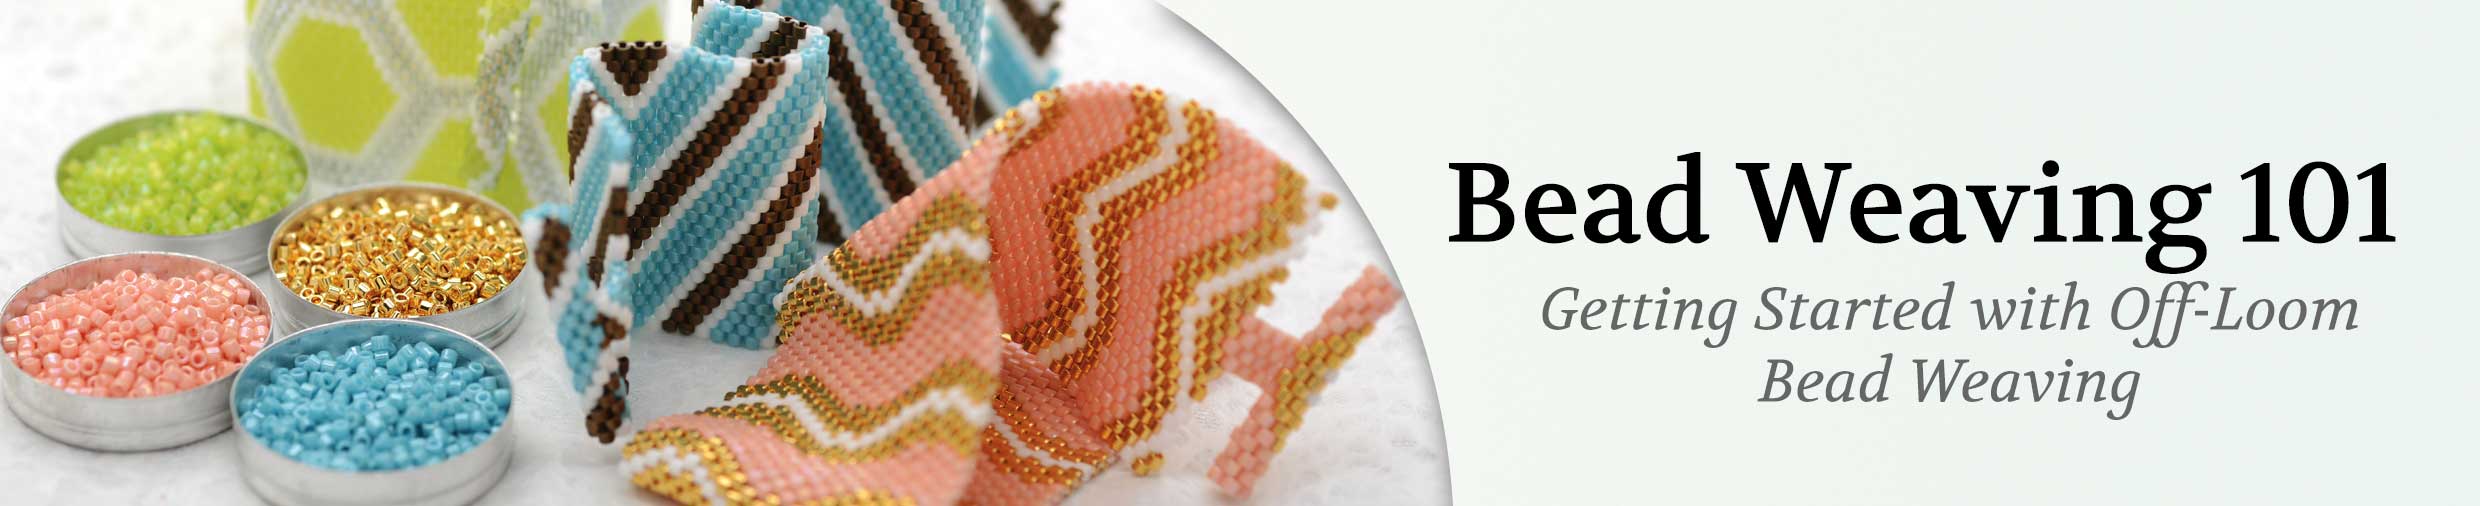 Bead Weaving 101: Getting Started with Off-Loom Bead Weaving